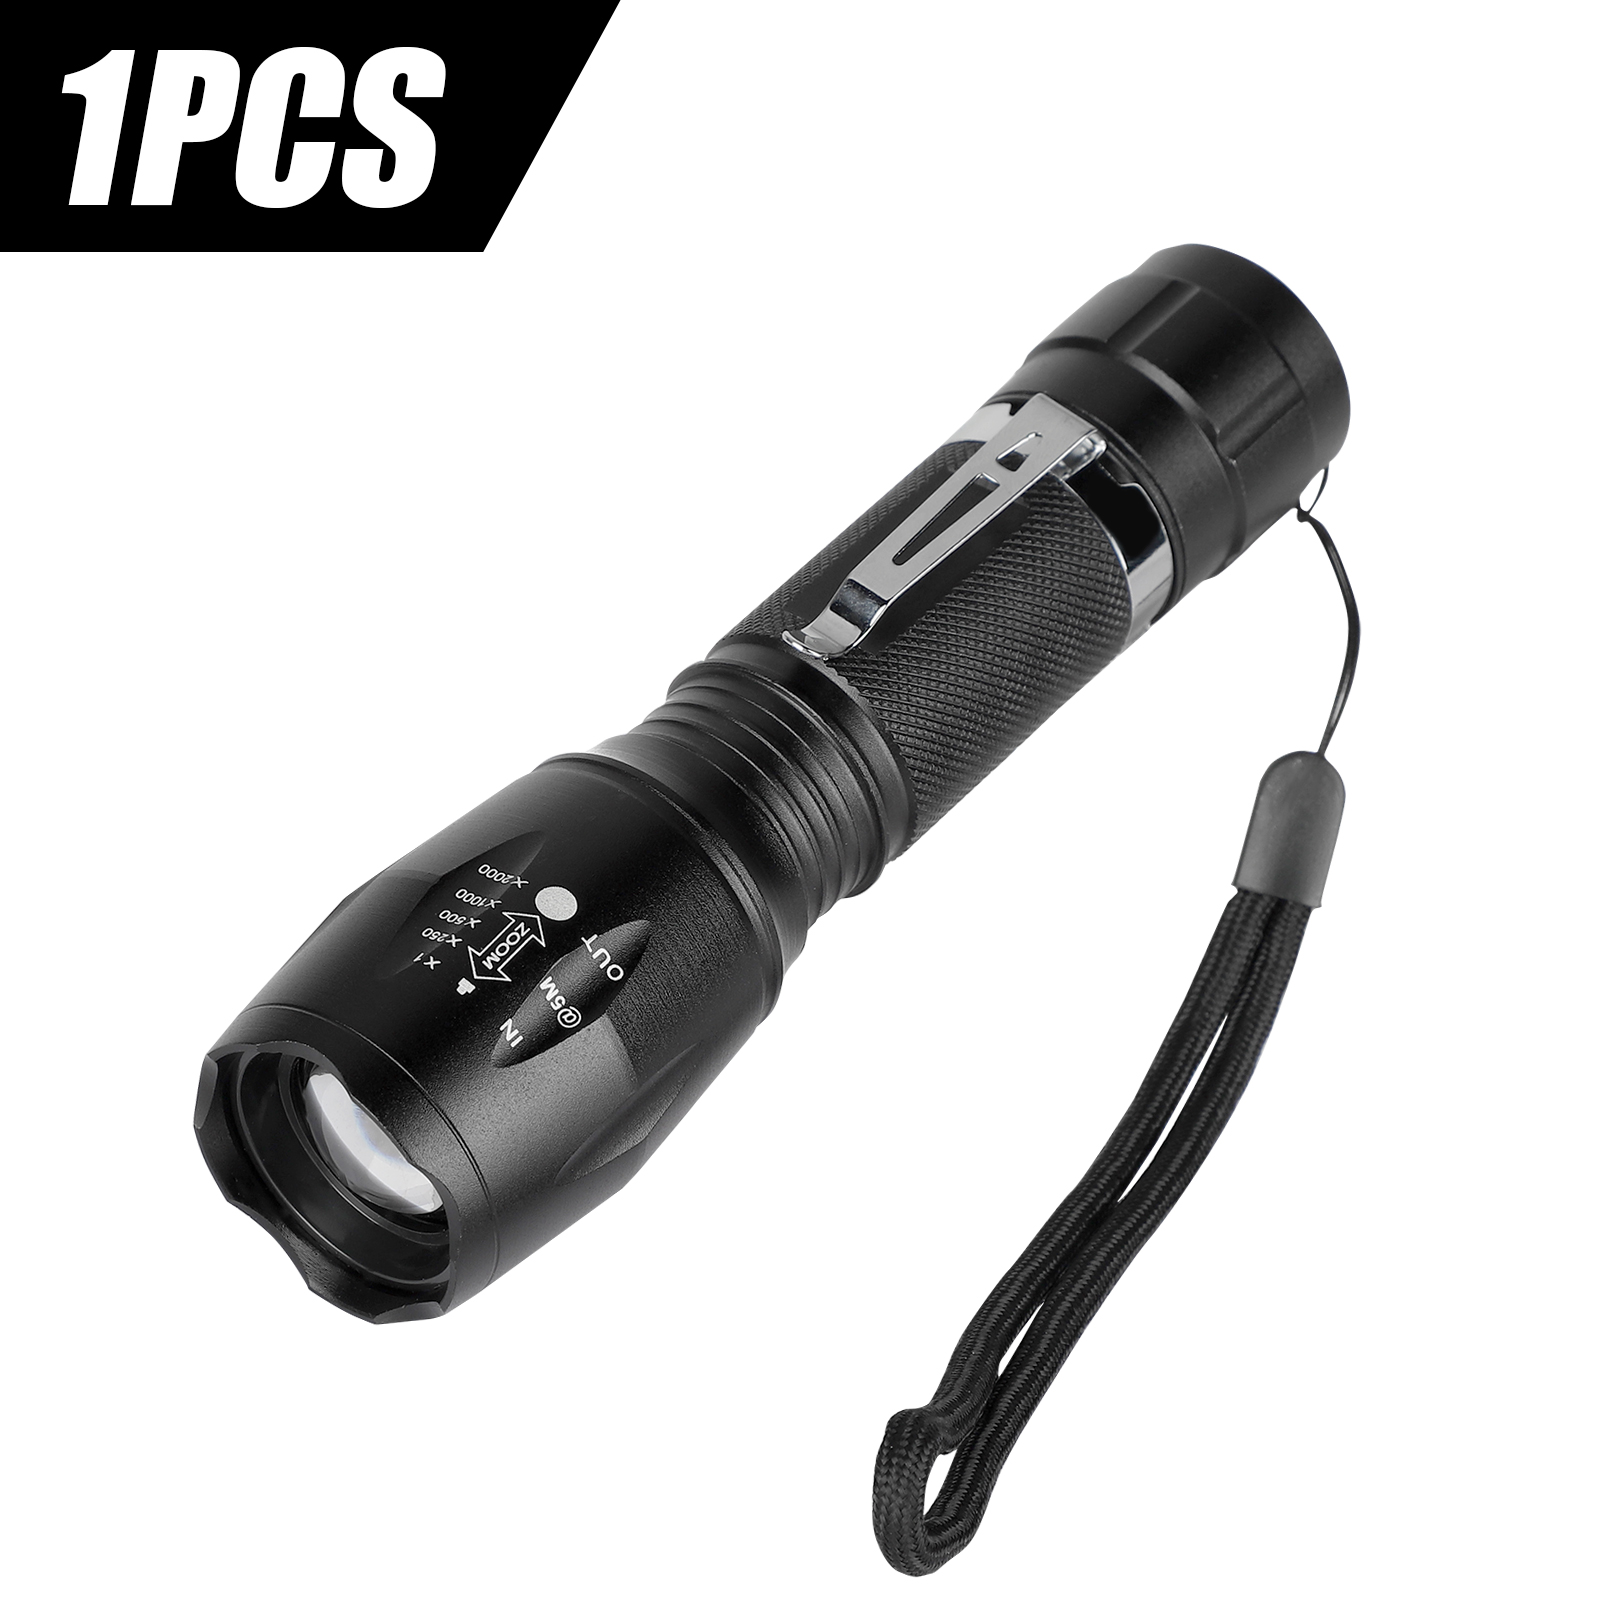 1pcs Portable COB LED Tactical USB Rechargeable Zoomable Flashlight Torch Lamp 